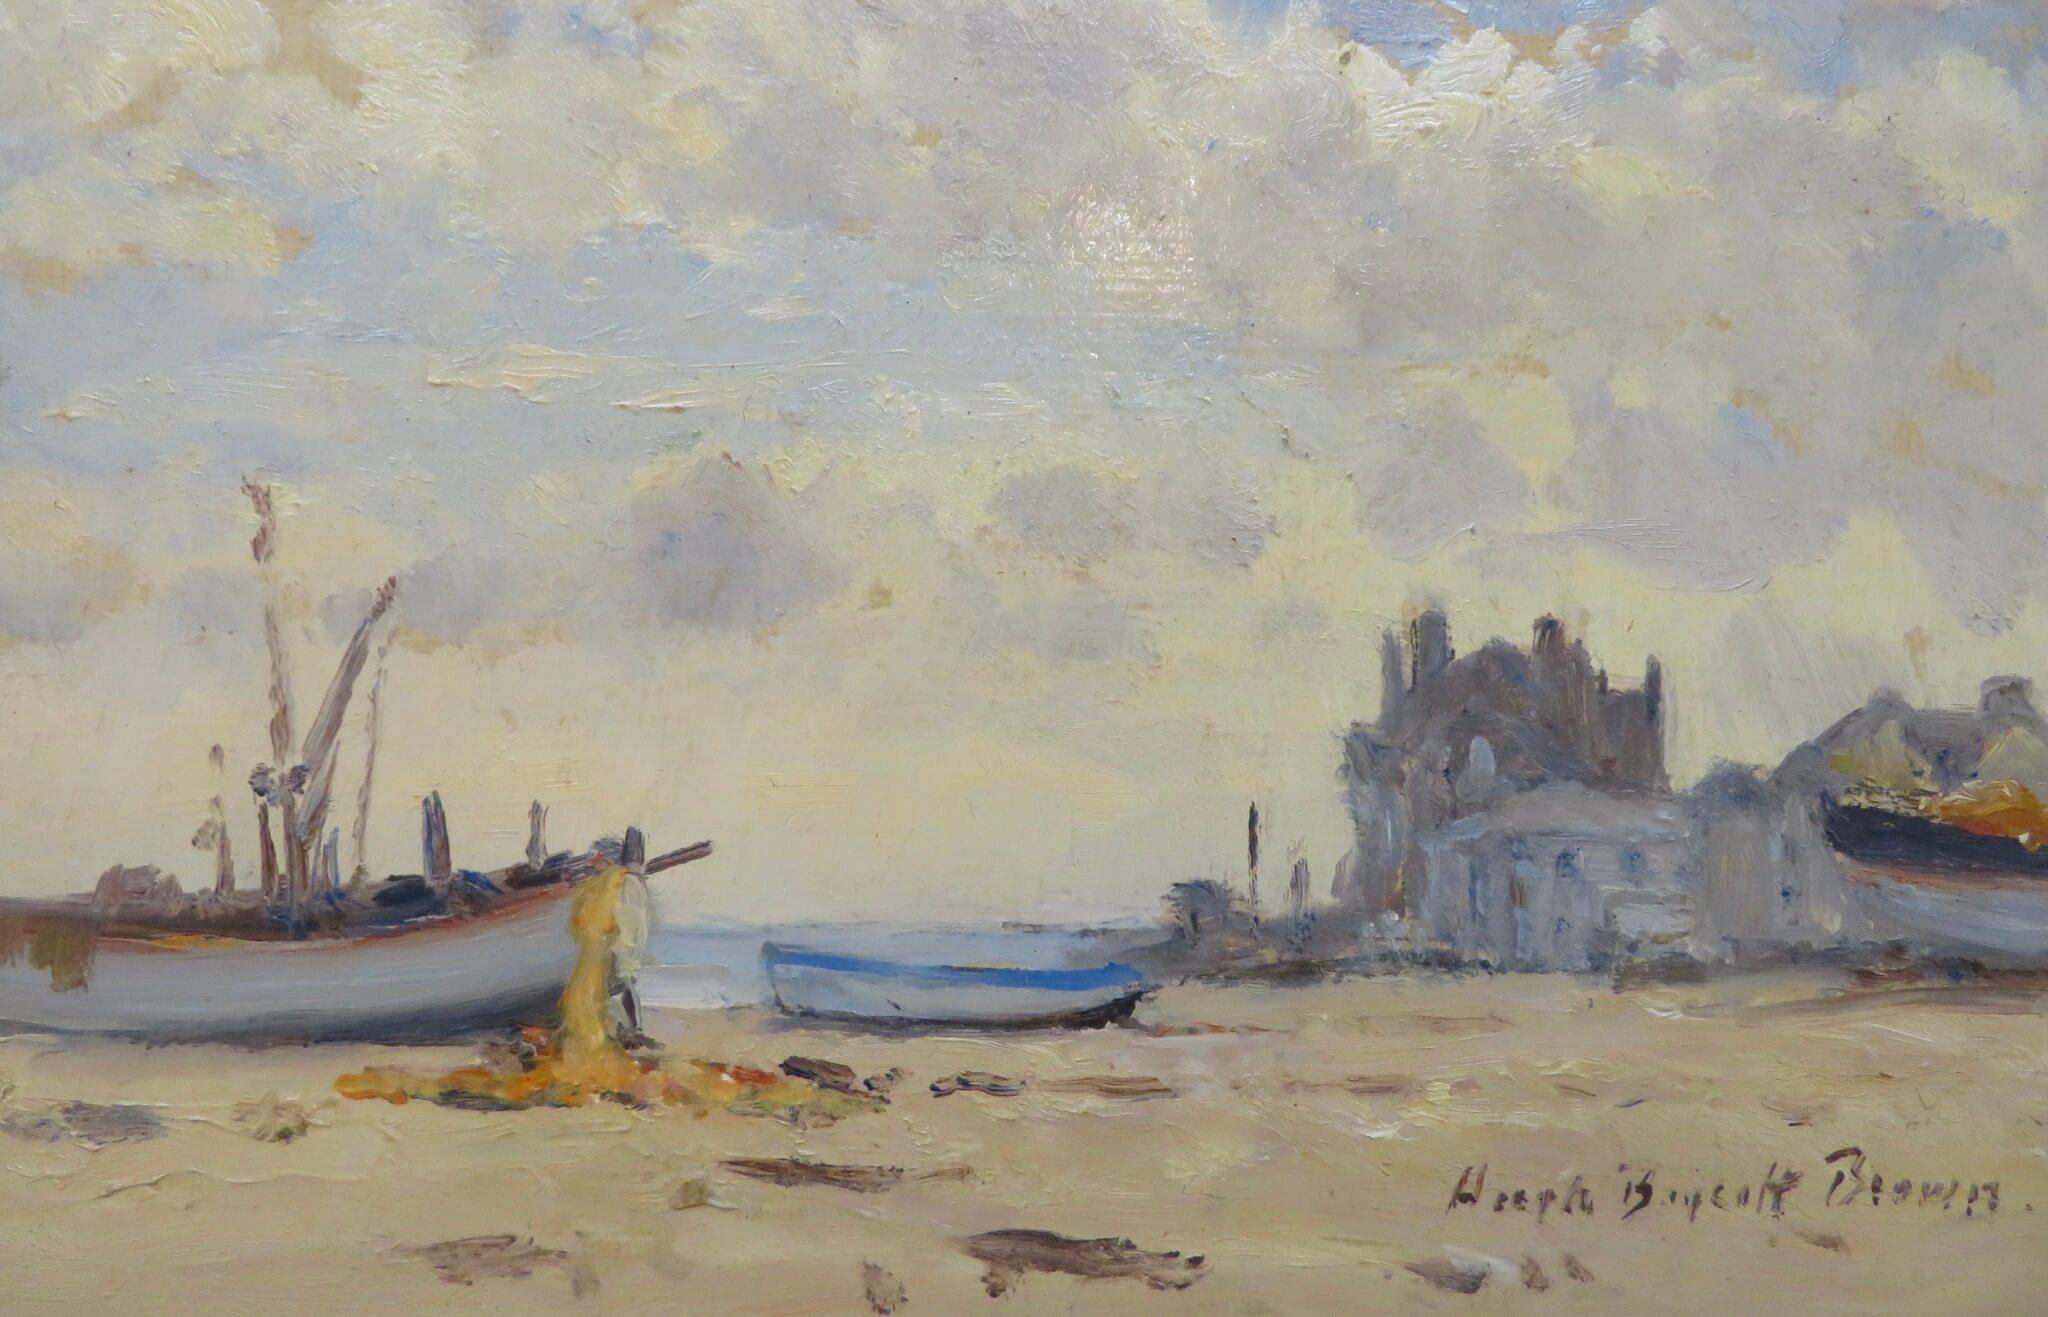 ARTIST: Hugh Boycott Brown RSMA (1909-1990) British
TITLE: “Beached Boats At Aldeburgh Suffolk”
SIGNED: lower right
MEDIUM: oil on board
SIZE:  40cm x 35cm inc frame
CONDITION: very good
DETAIL: Painter and teacher, born in Bushey, Hertfordshire,